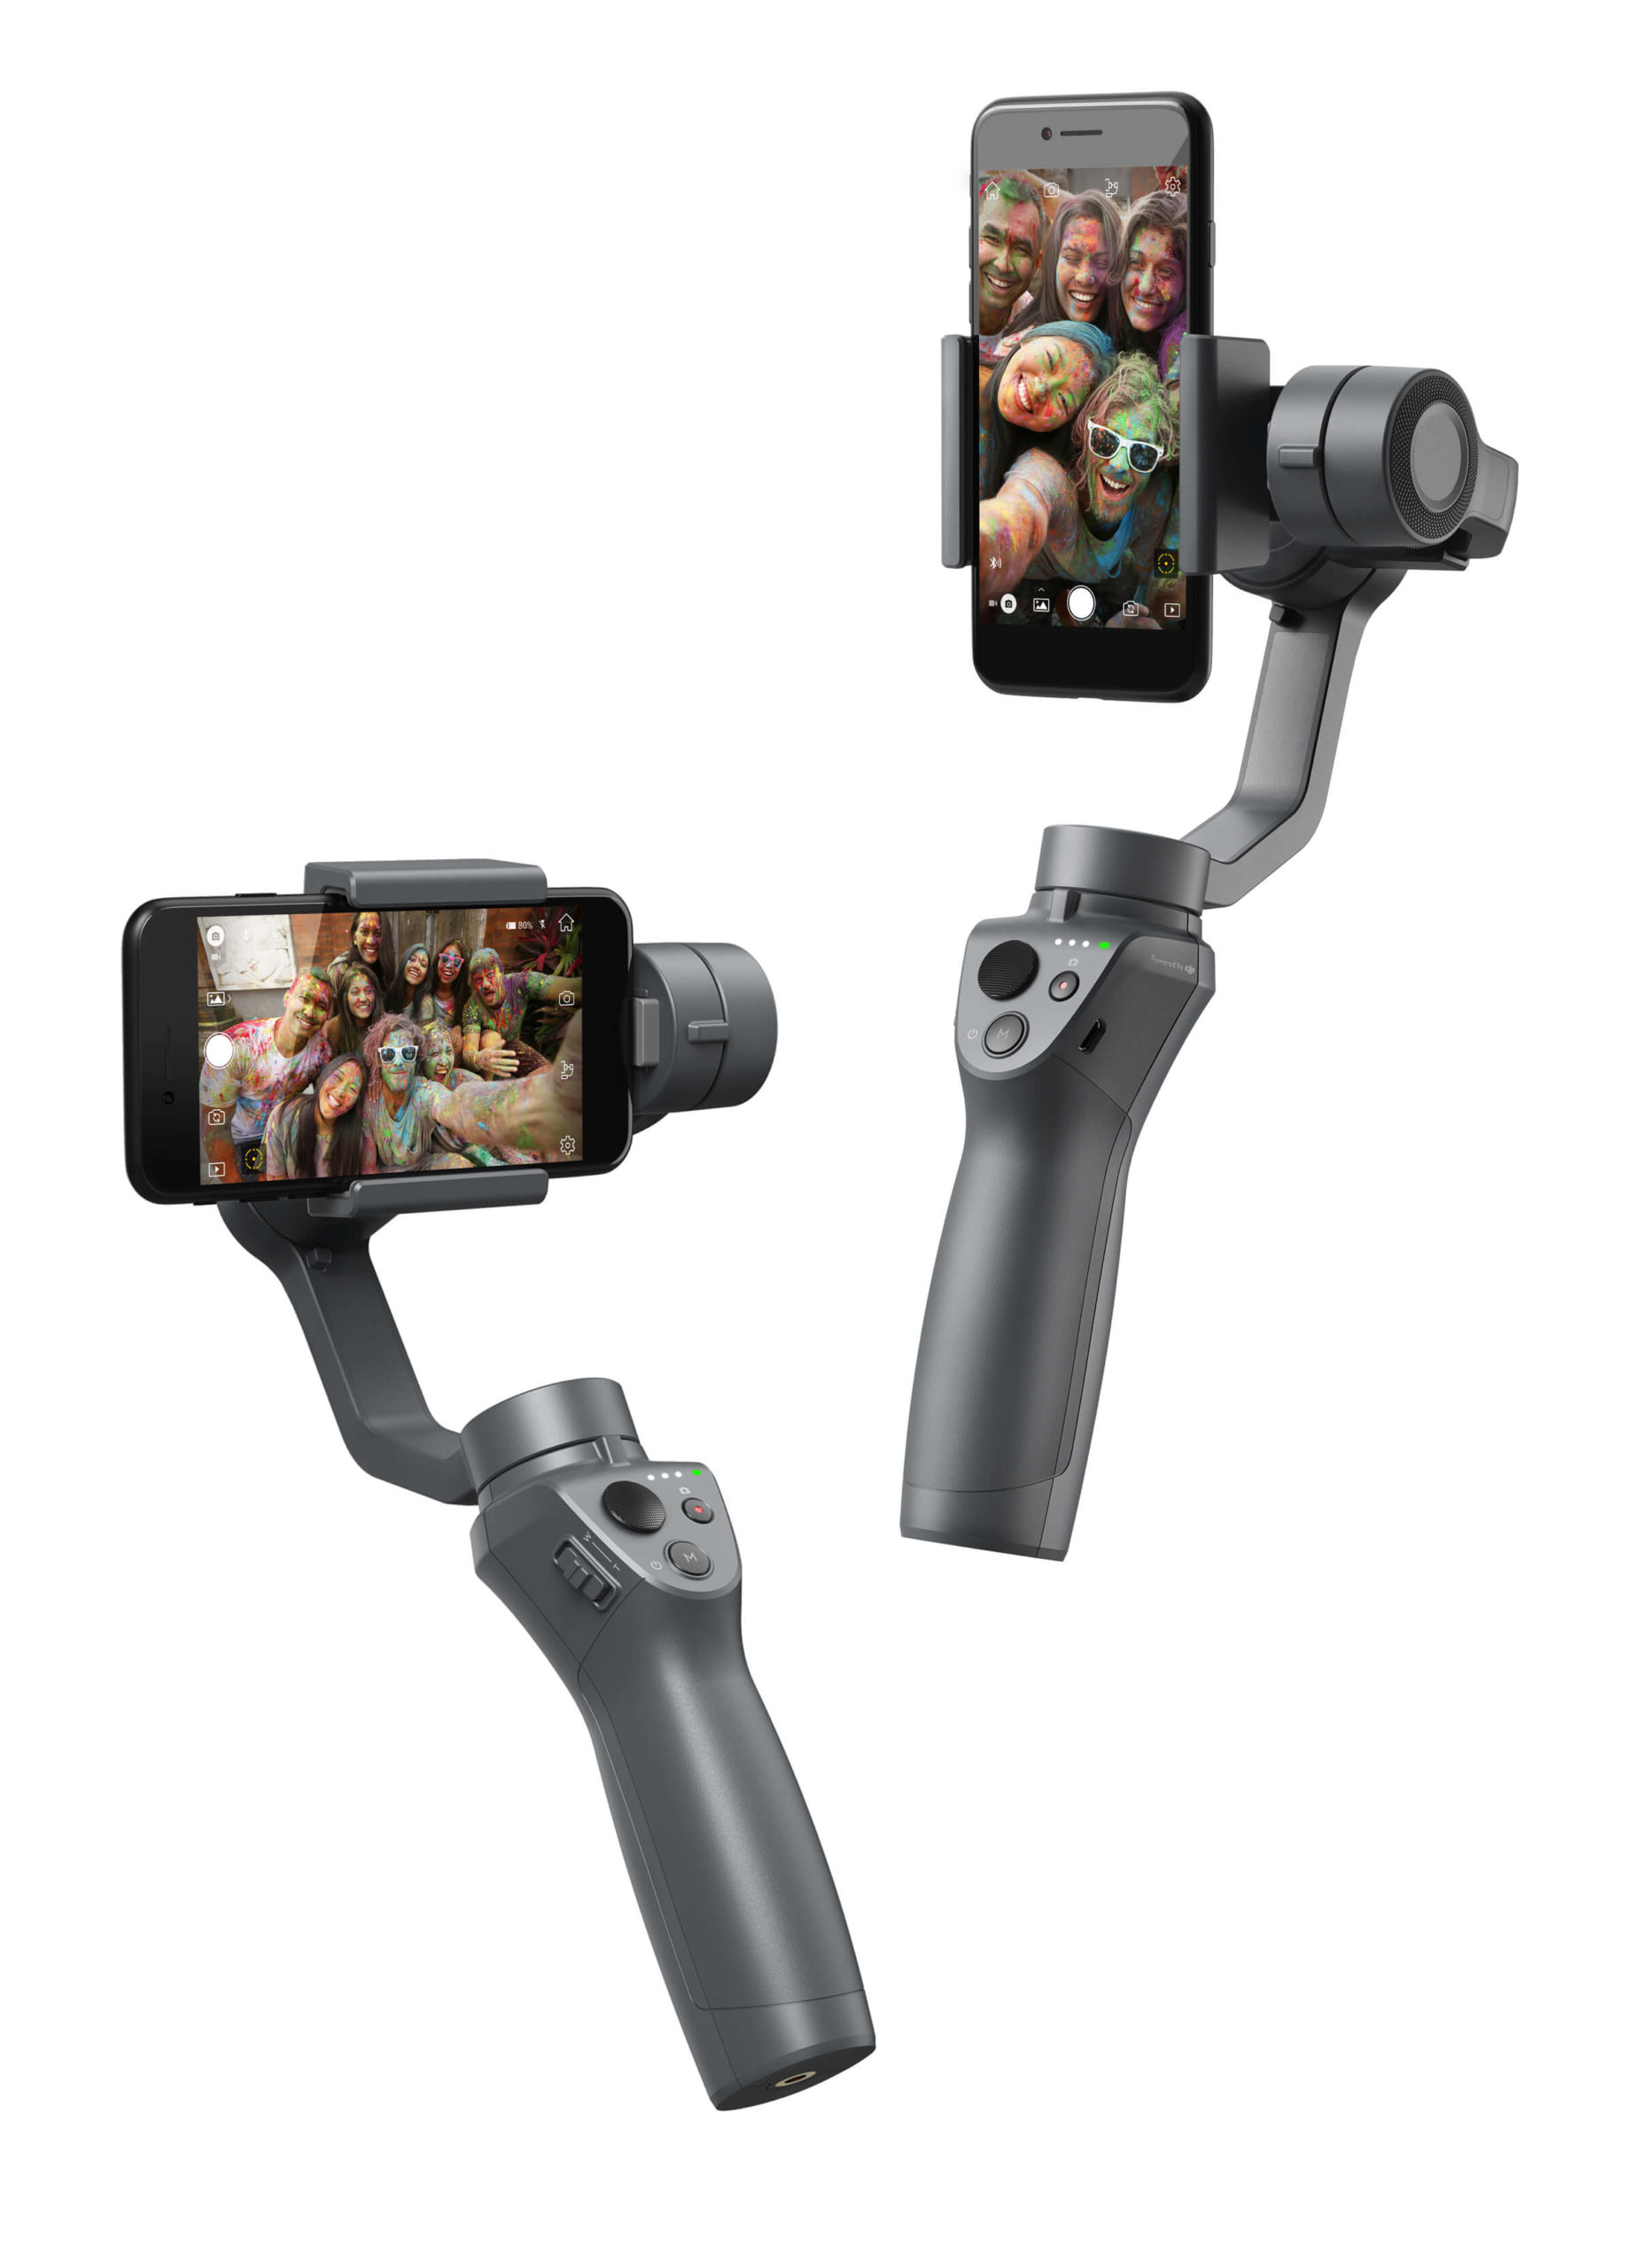 DJI’s Refreshed Smartphone Video Gimbal Is Now Way Cheaper And Whole Lot Better